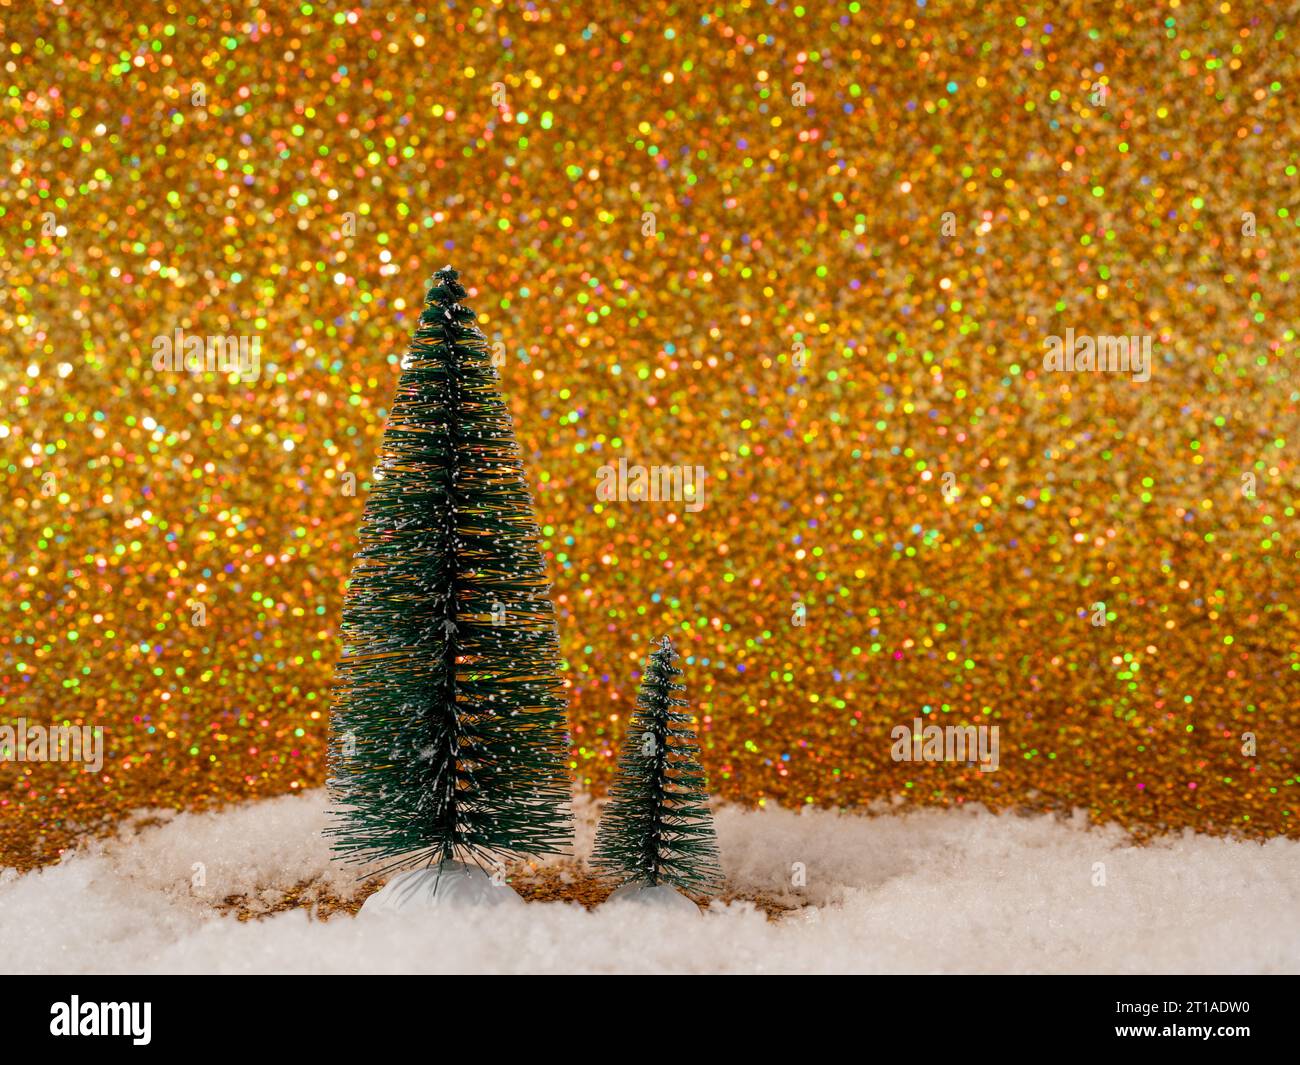 The photo shows a festive scene with decorative artificial Christmas trees set on shiny white snow. The backdrop features a shimmering gold backdrop t Stock Photo